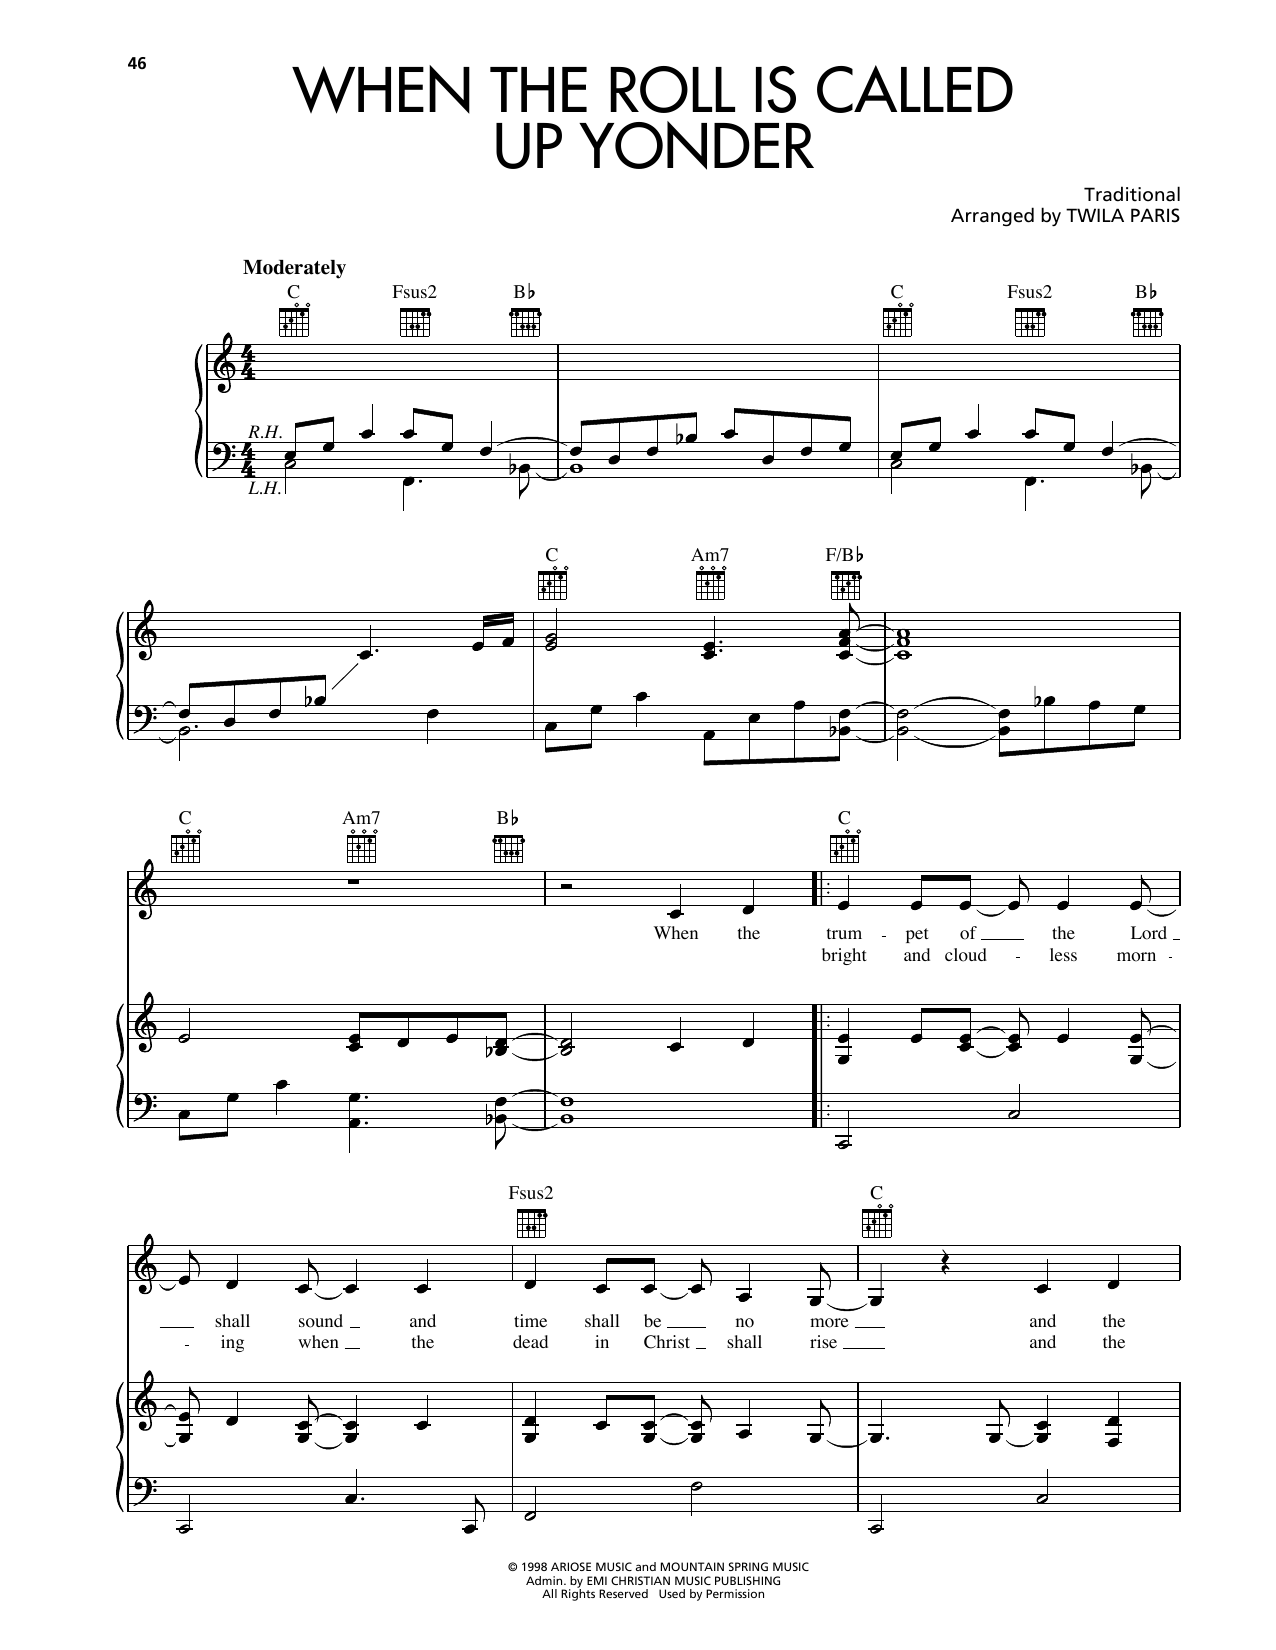 Download Twila Paris When The Roll Is Called Up Yonder Sheet Music